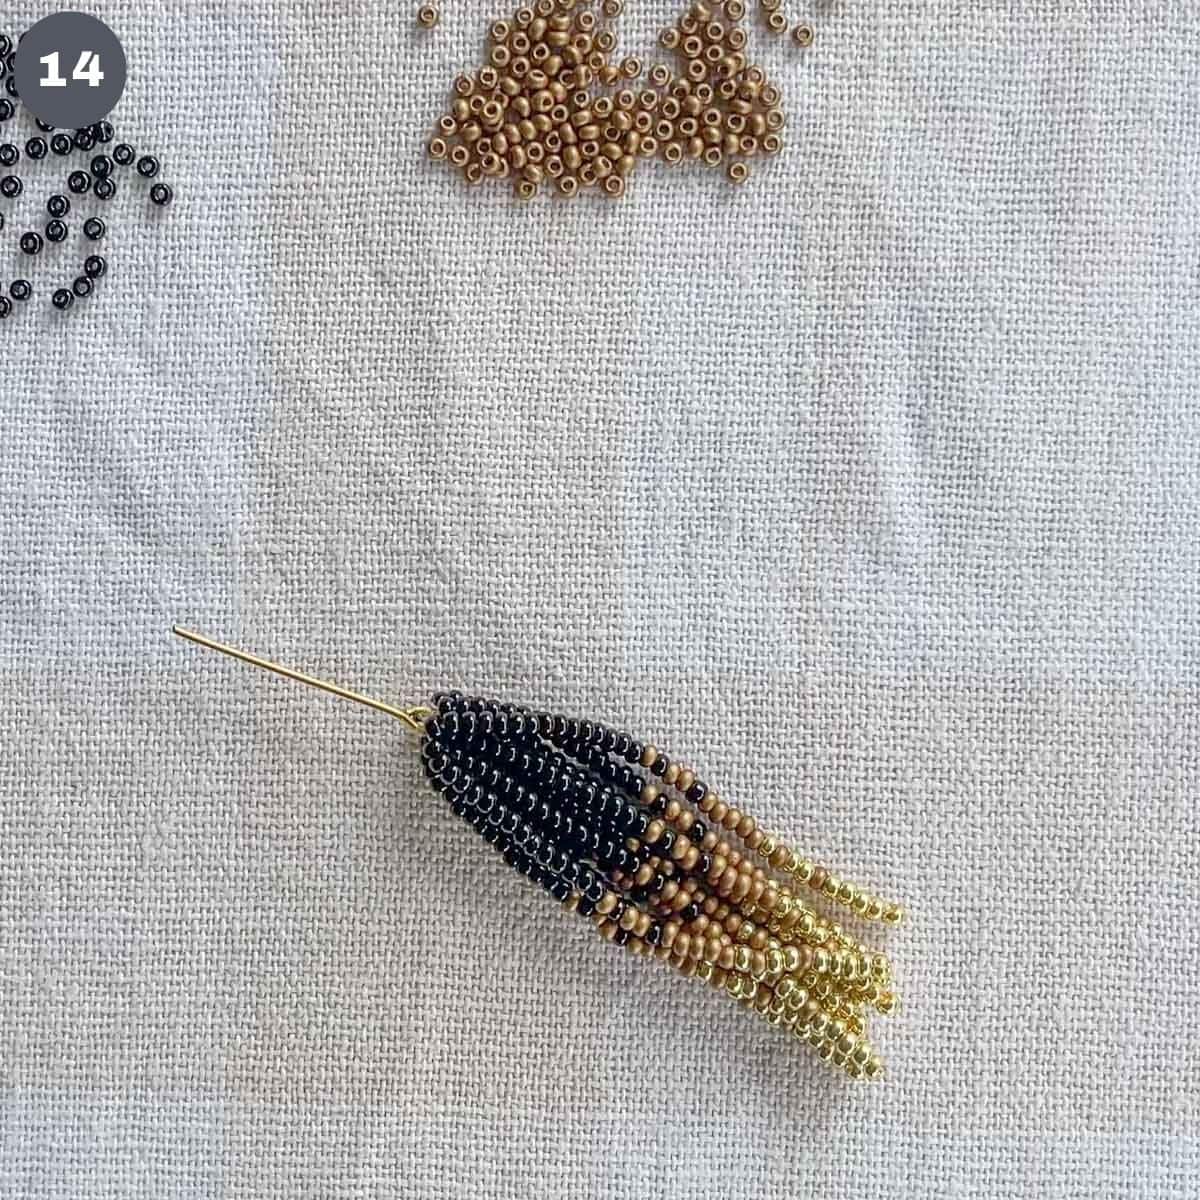 A tassel of black, gold and bronze beads attached to an eye pin.